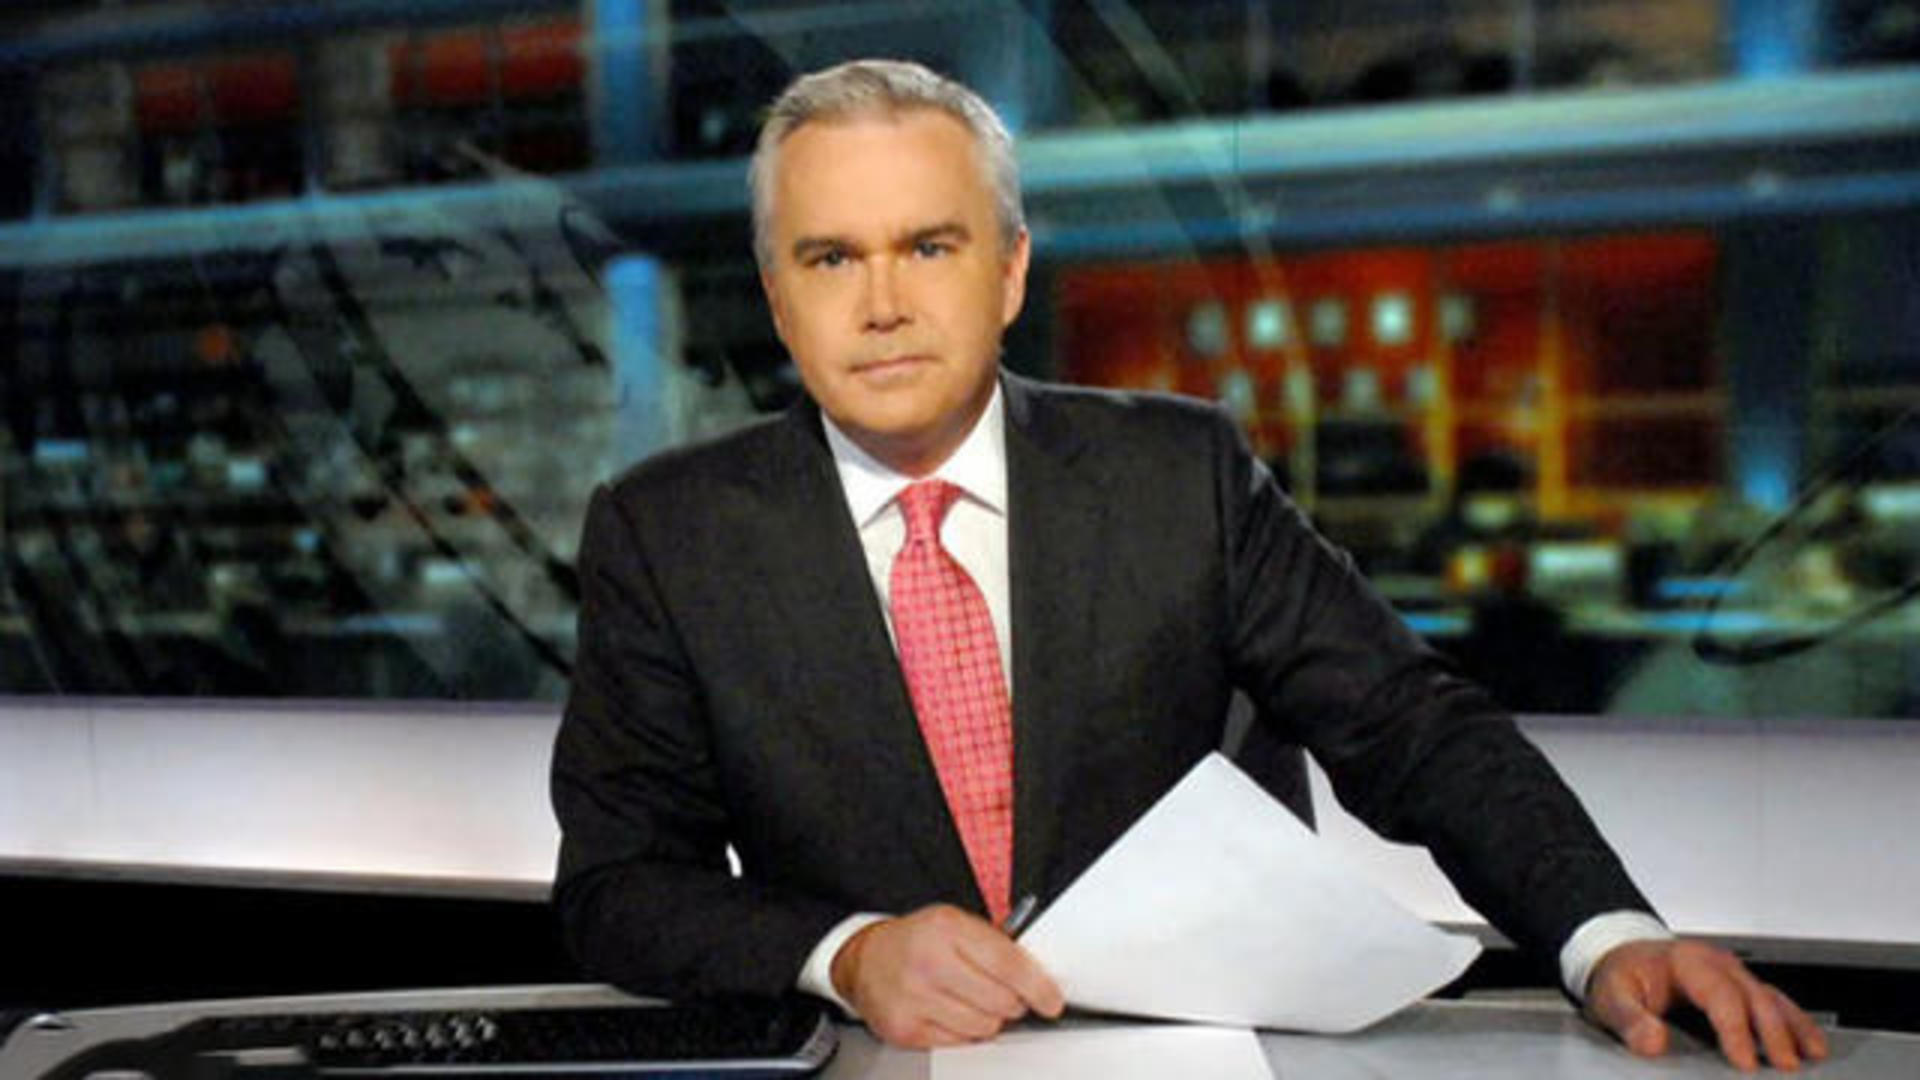 Huw Edwards, BBC presenter, named in connection with sex photo scandal pic